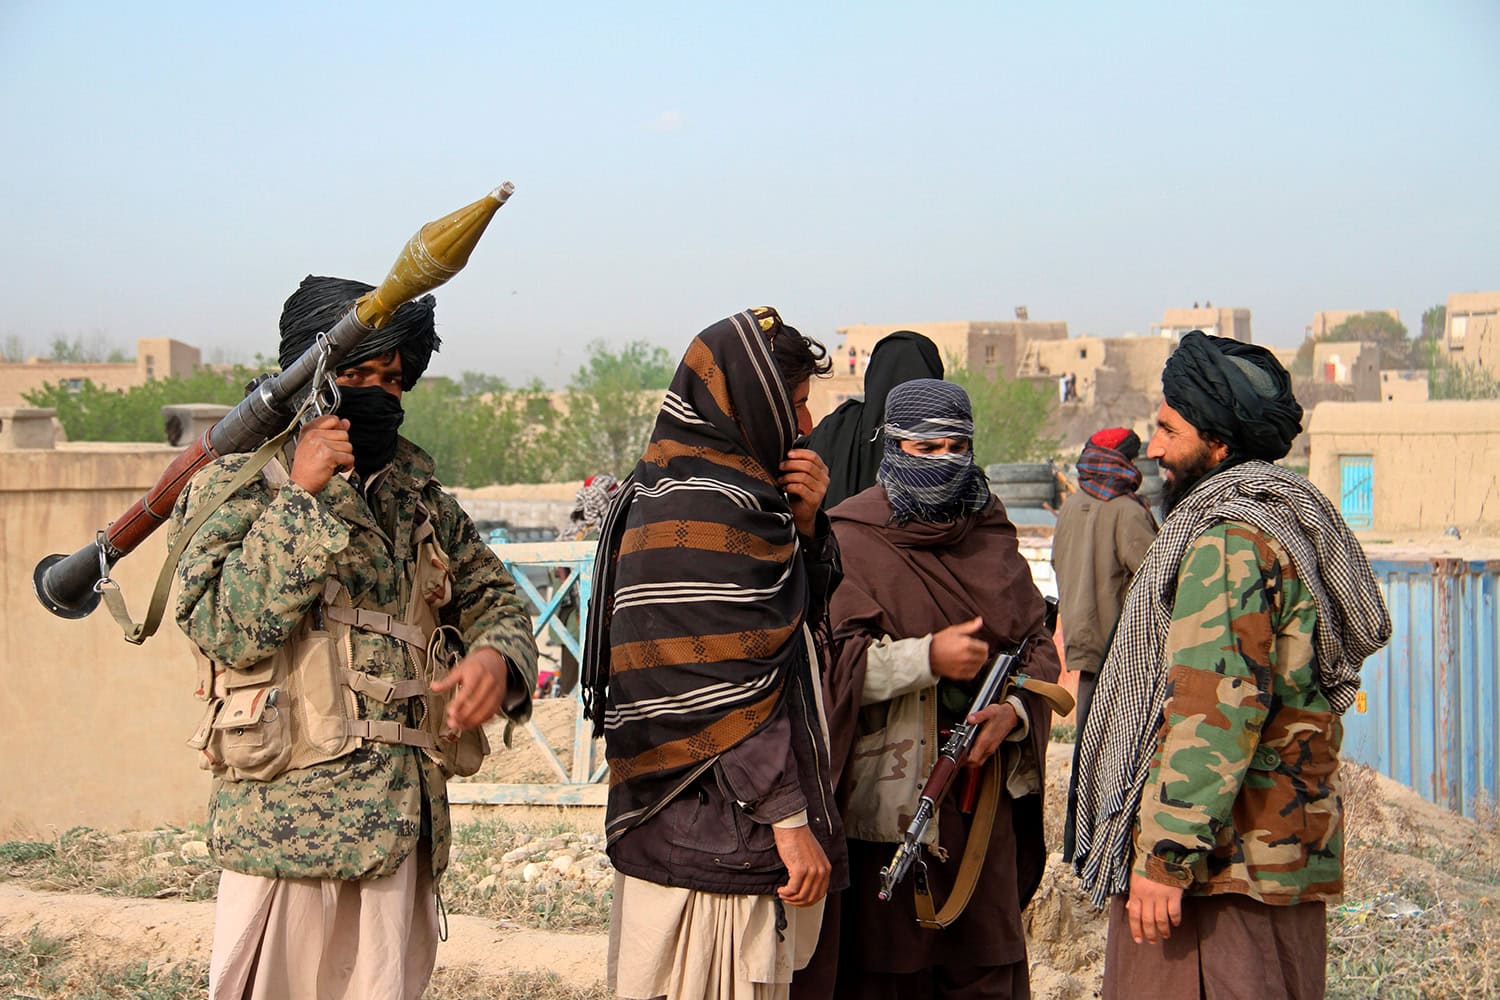 New Taliban group wants to allow women to work